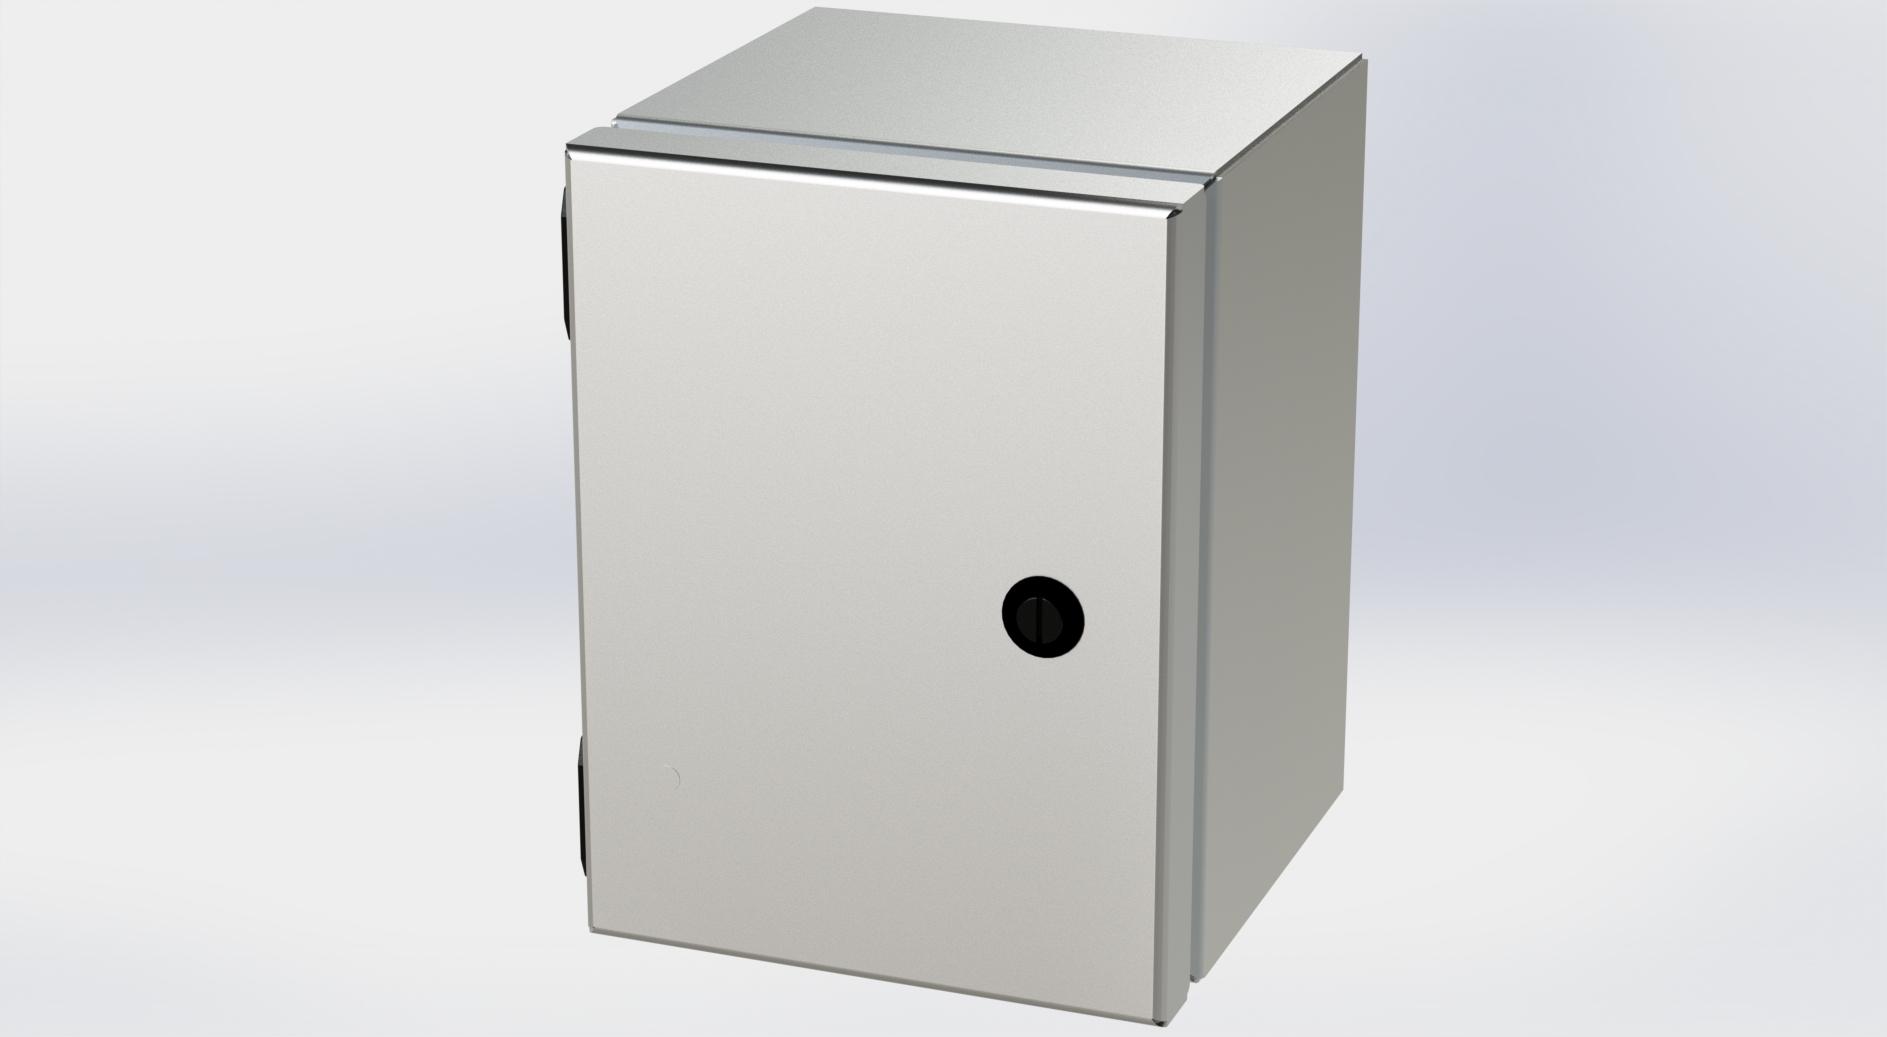 Saginaw Control SCE-8066ELJSS S.S. ELJ Enclosure, Height:8.00", Width:6.00", Depth:6.00", #4 brushed finish on all exterior surfaces. Optional sub-panels are powder coated white.